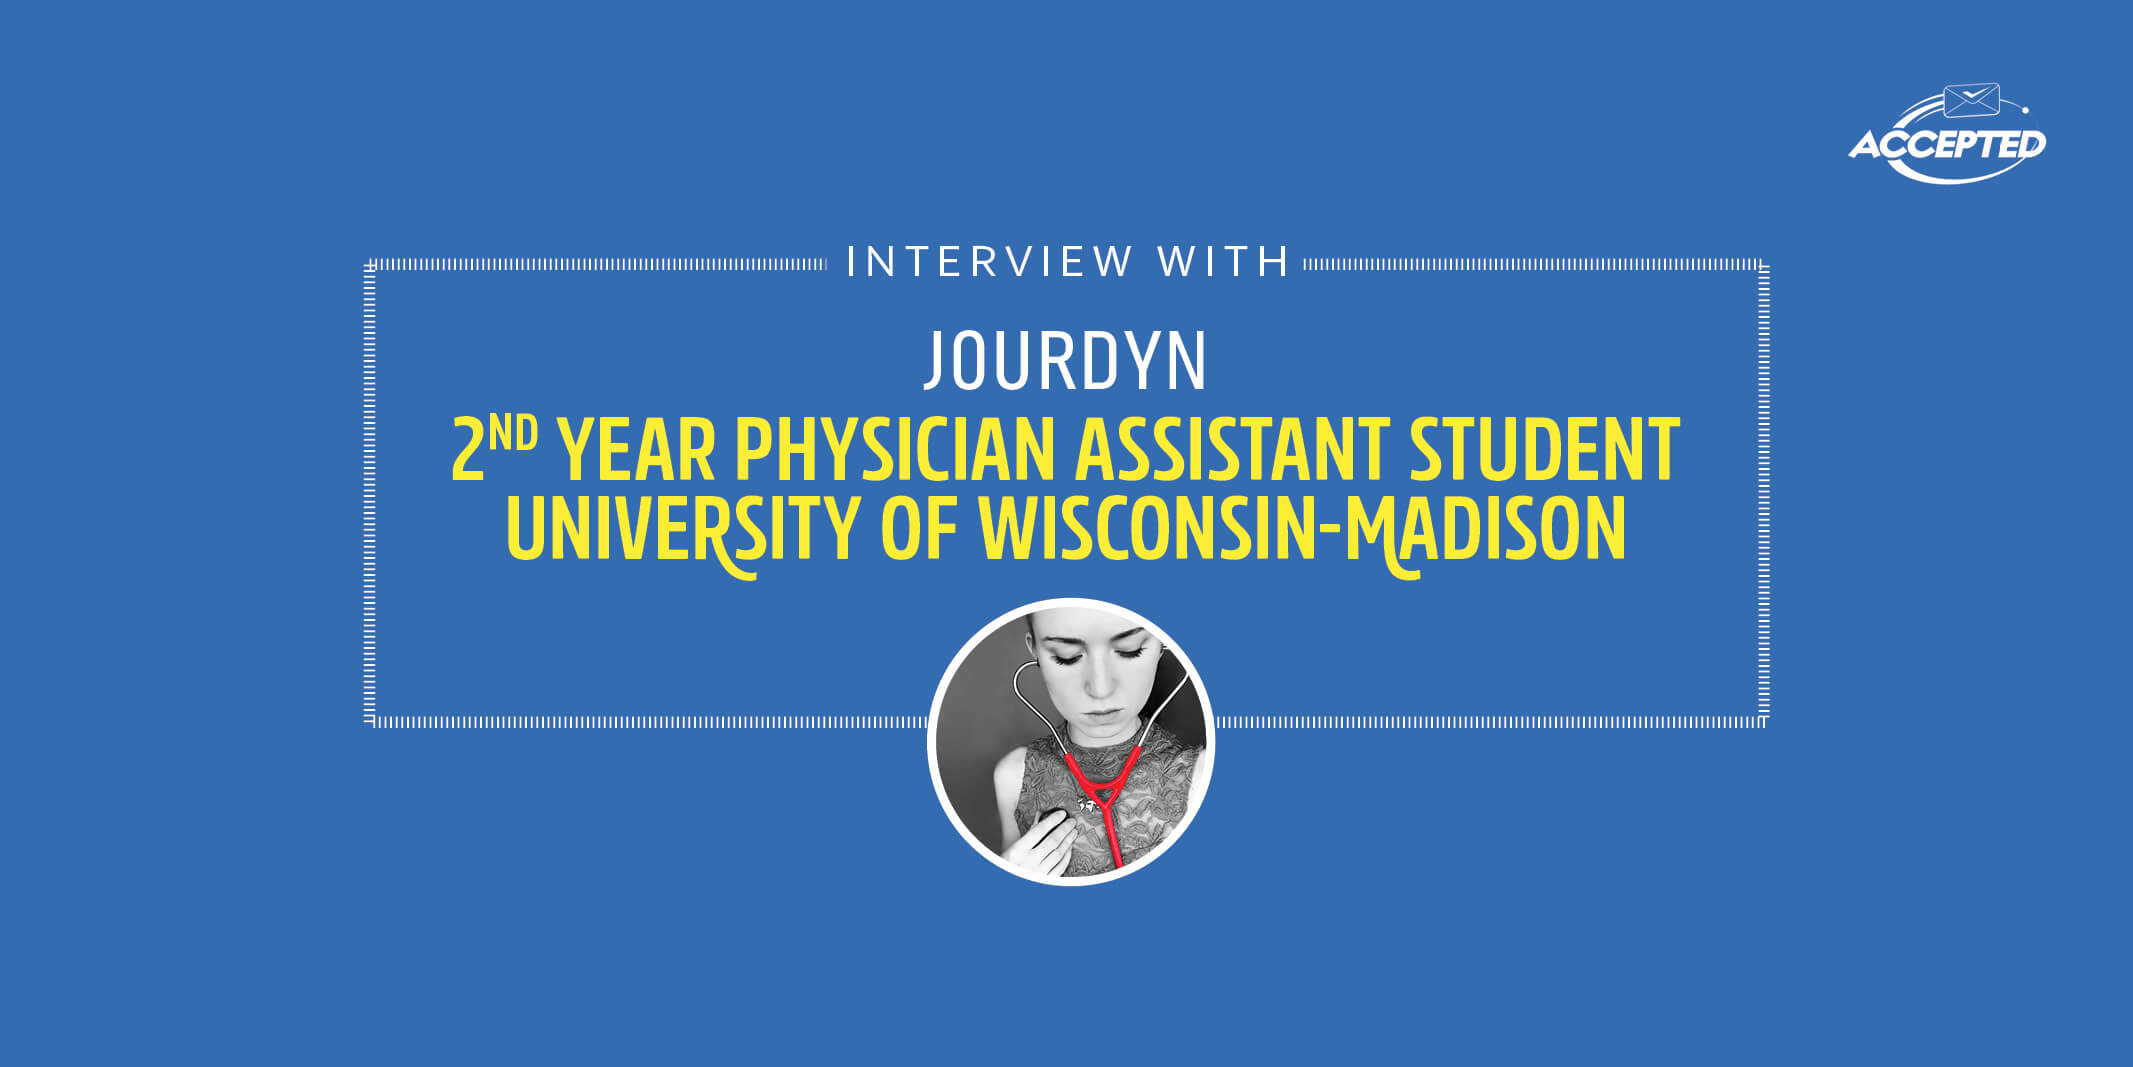 Physician Assistant Student Interview with Jourdyn - A 2nd Year Student at the University of Wisconsin-Madison